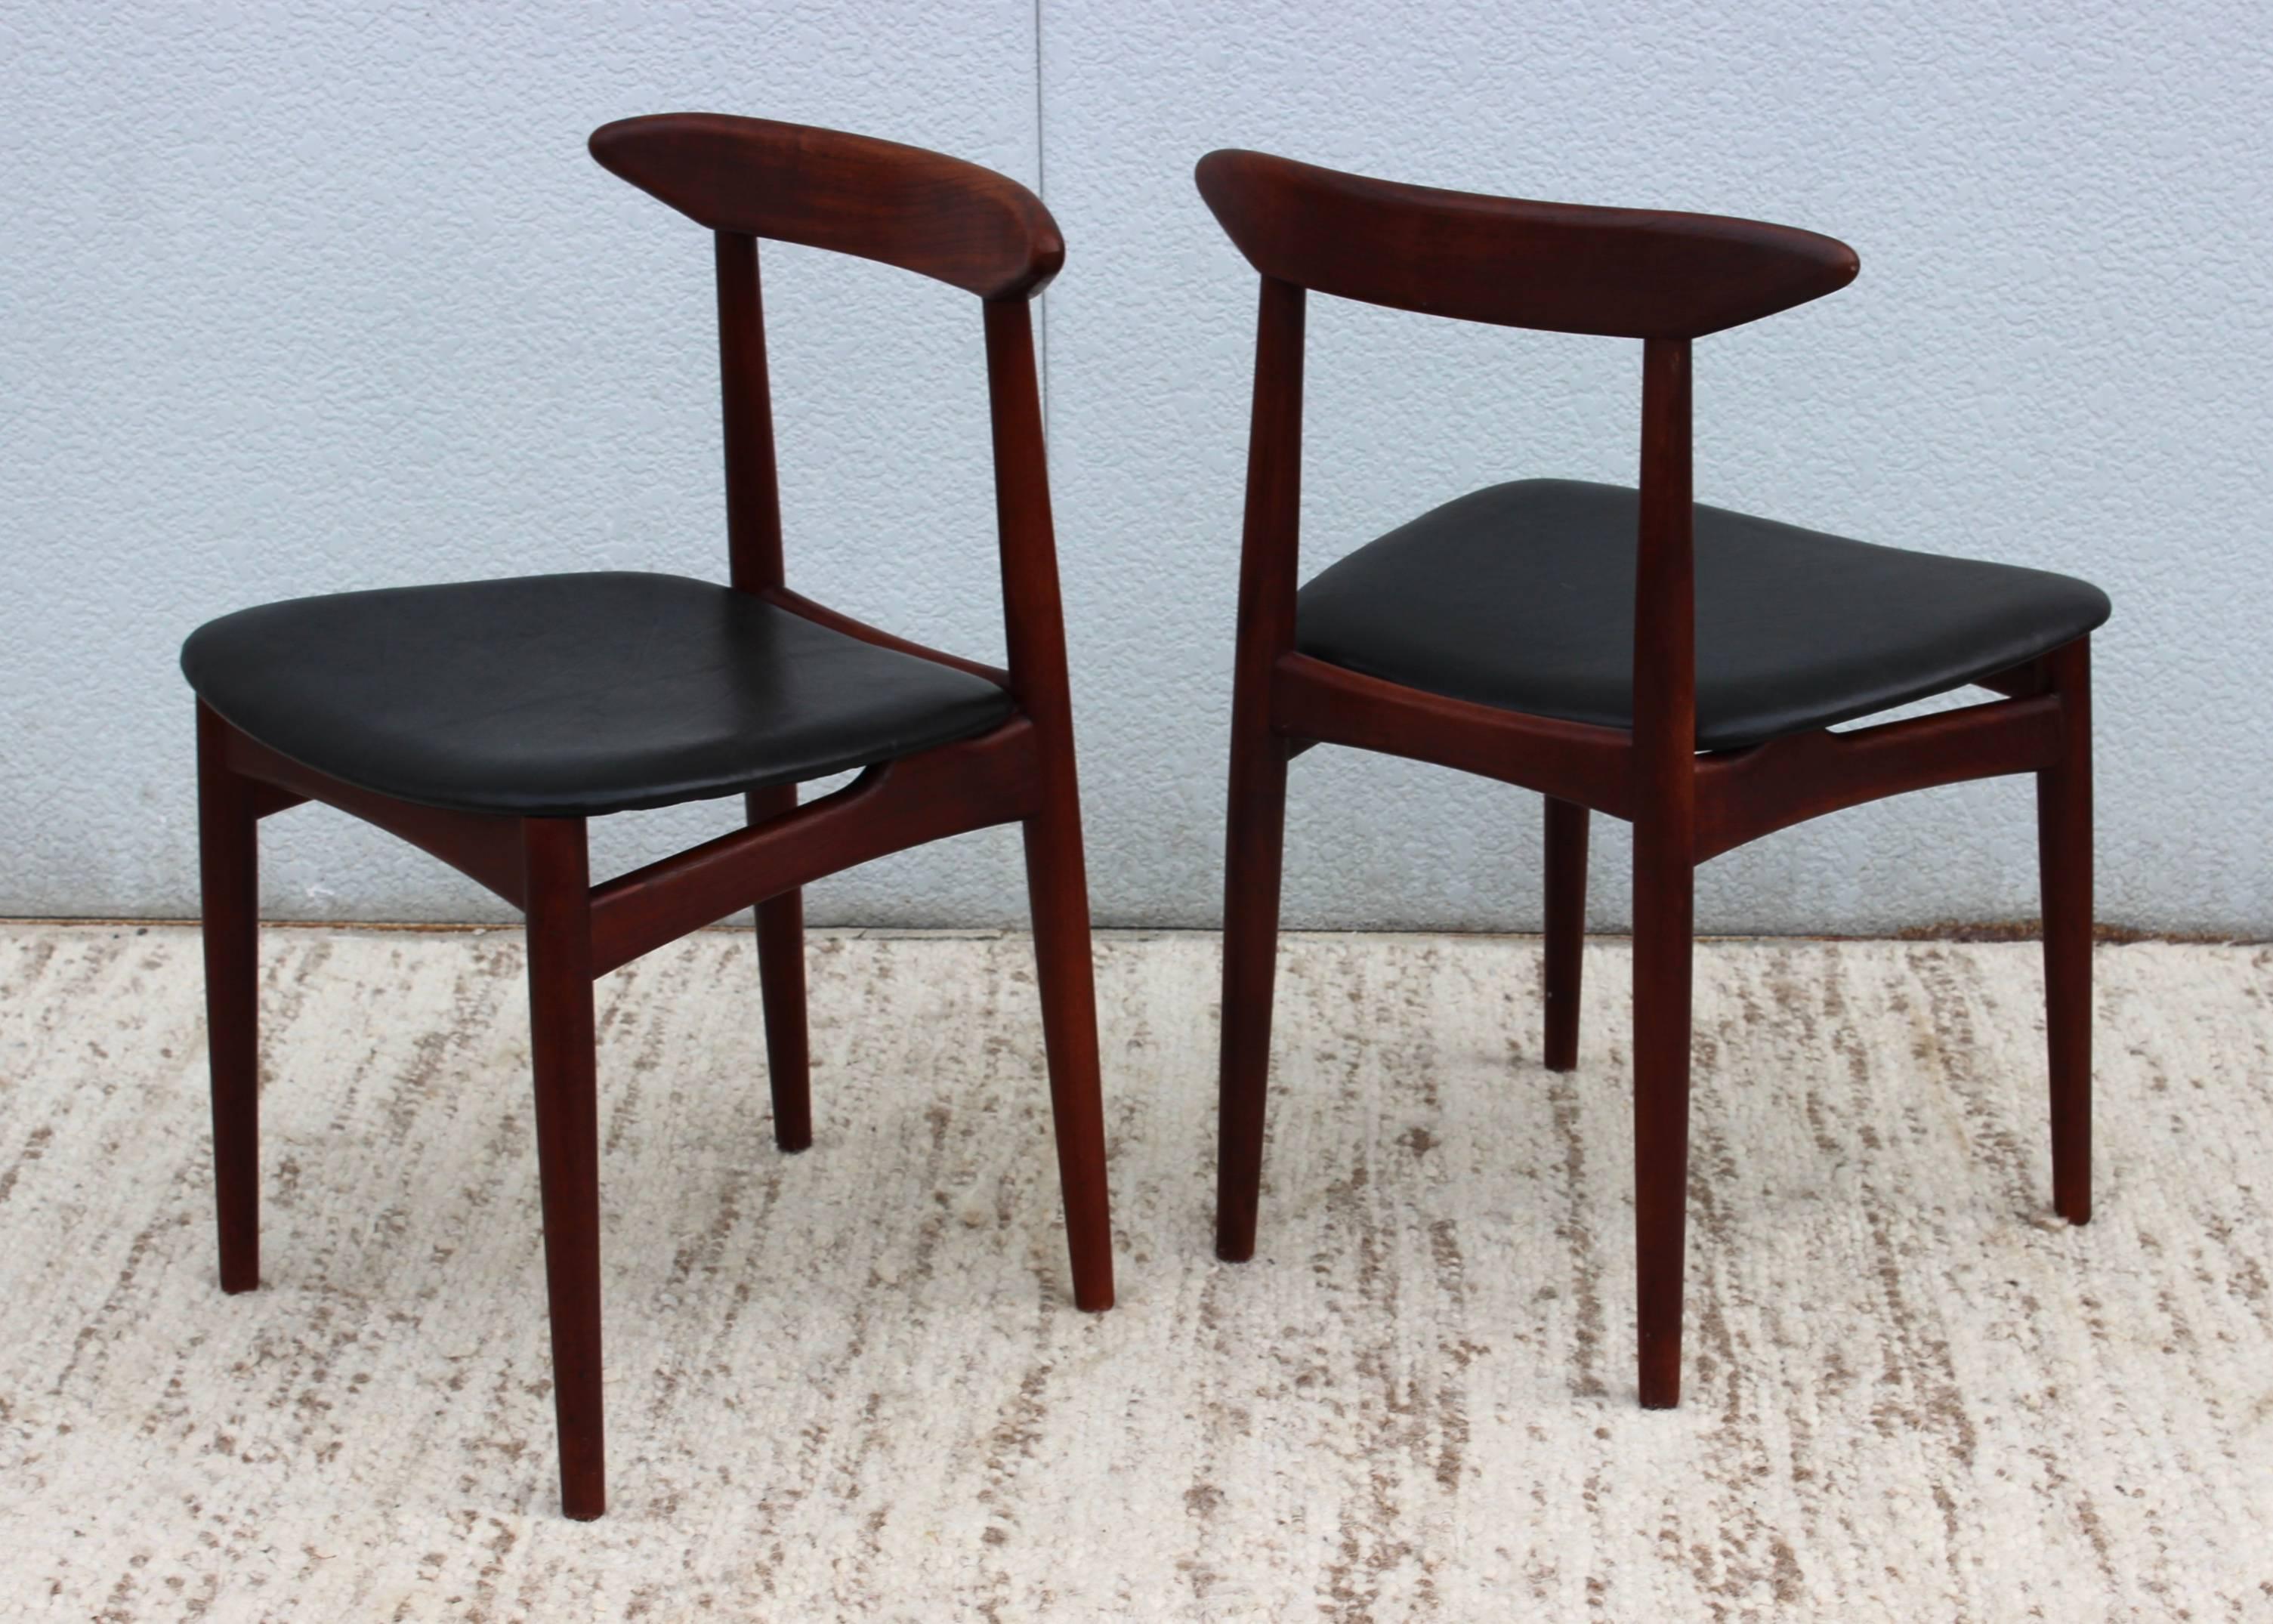 1950s Danish teak with leather upholstery side chairs.